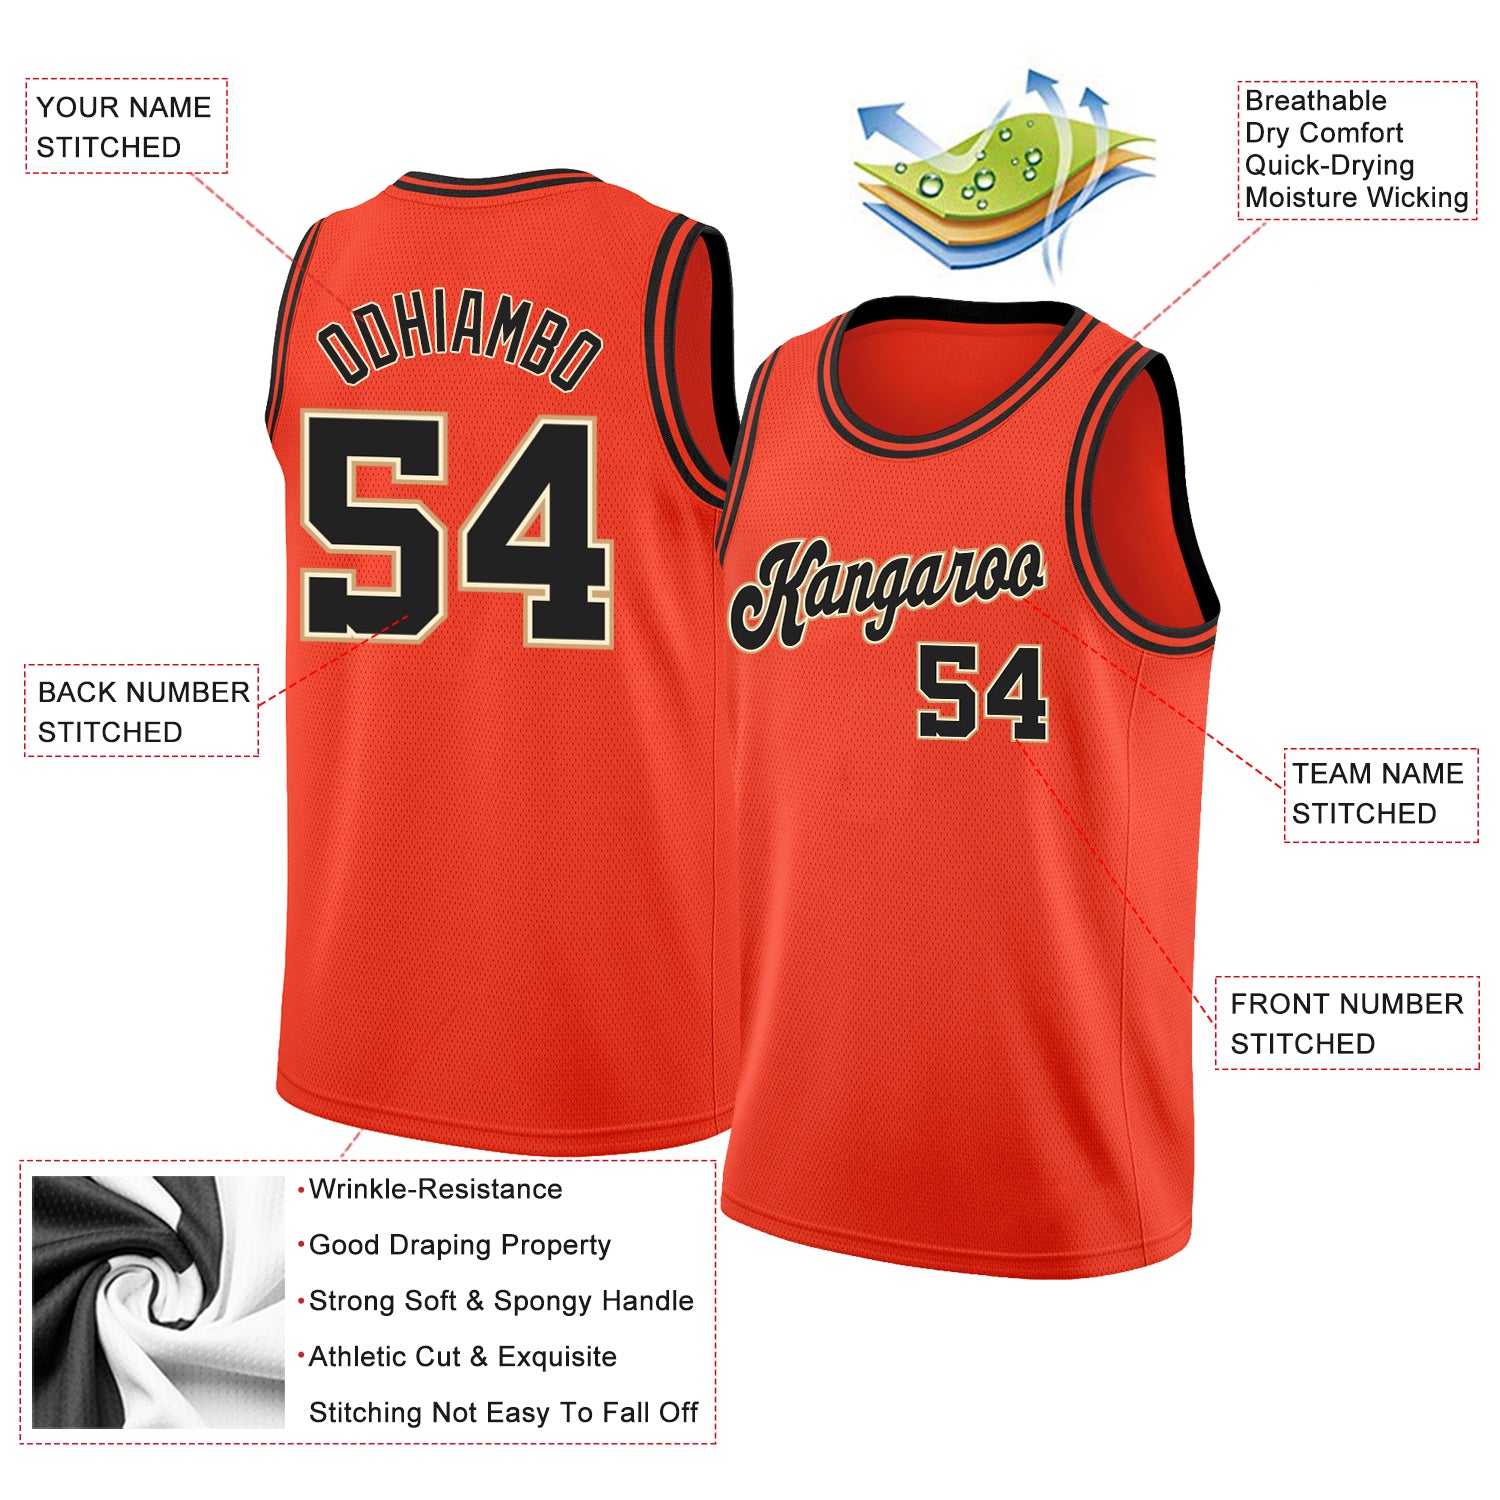 Rarp-ID Outrageous Orange Recycled Unisex Basketball Jersey